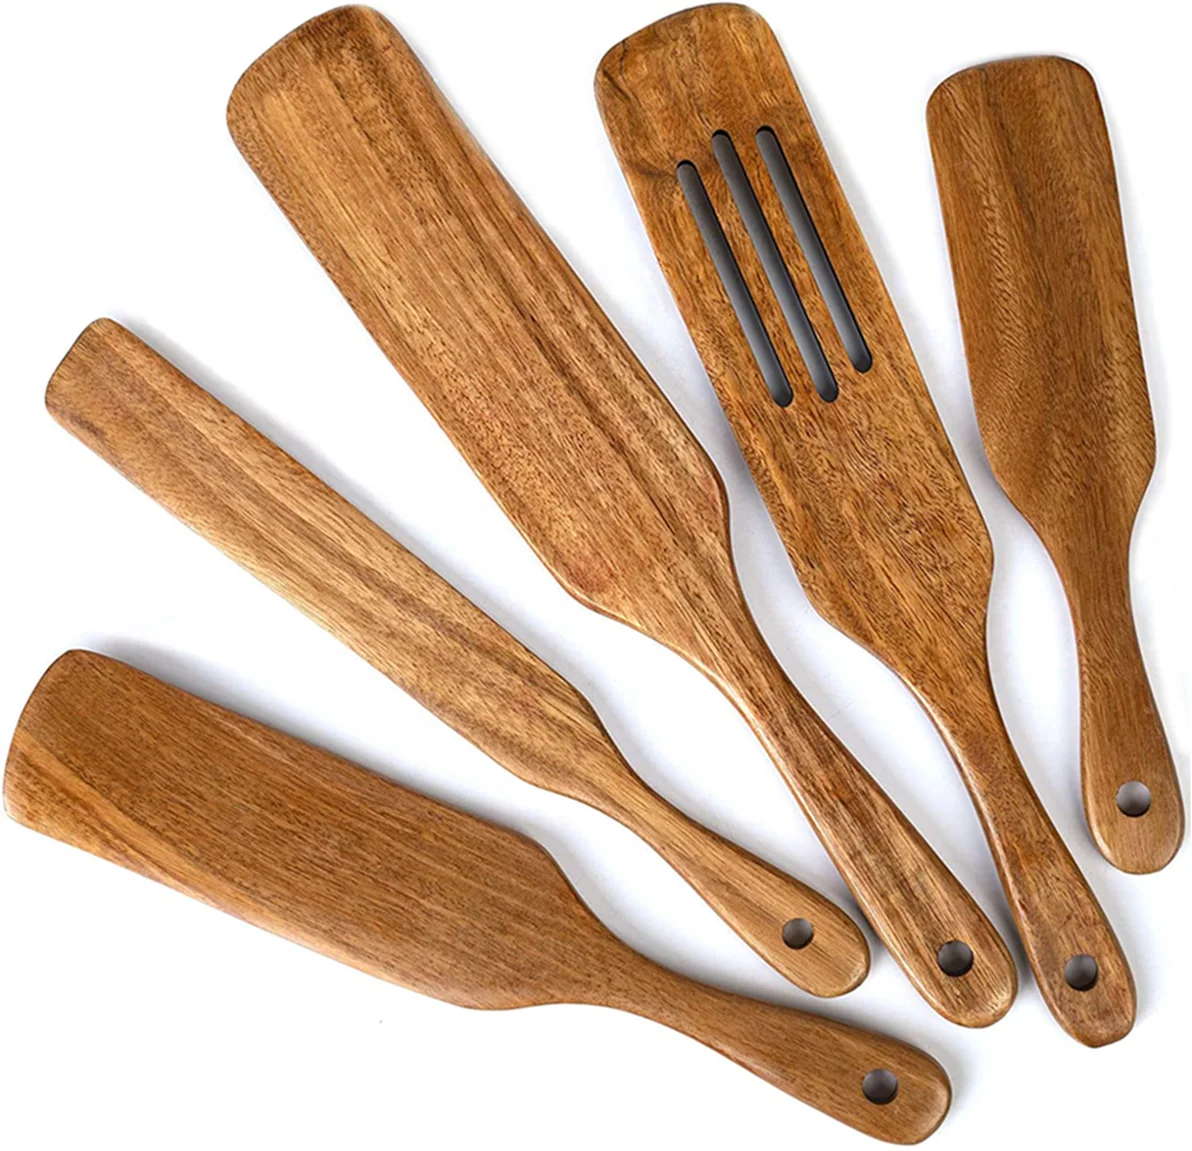 

5 pcs Non-Stick Utensils Tools Durable Natural Teak Slotted Stirring Spatula Kitchen Cookware Wooden Spurtle for Cooking